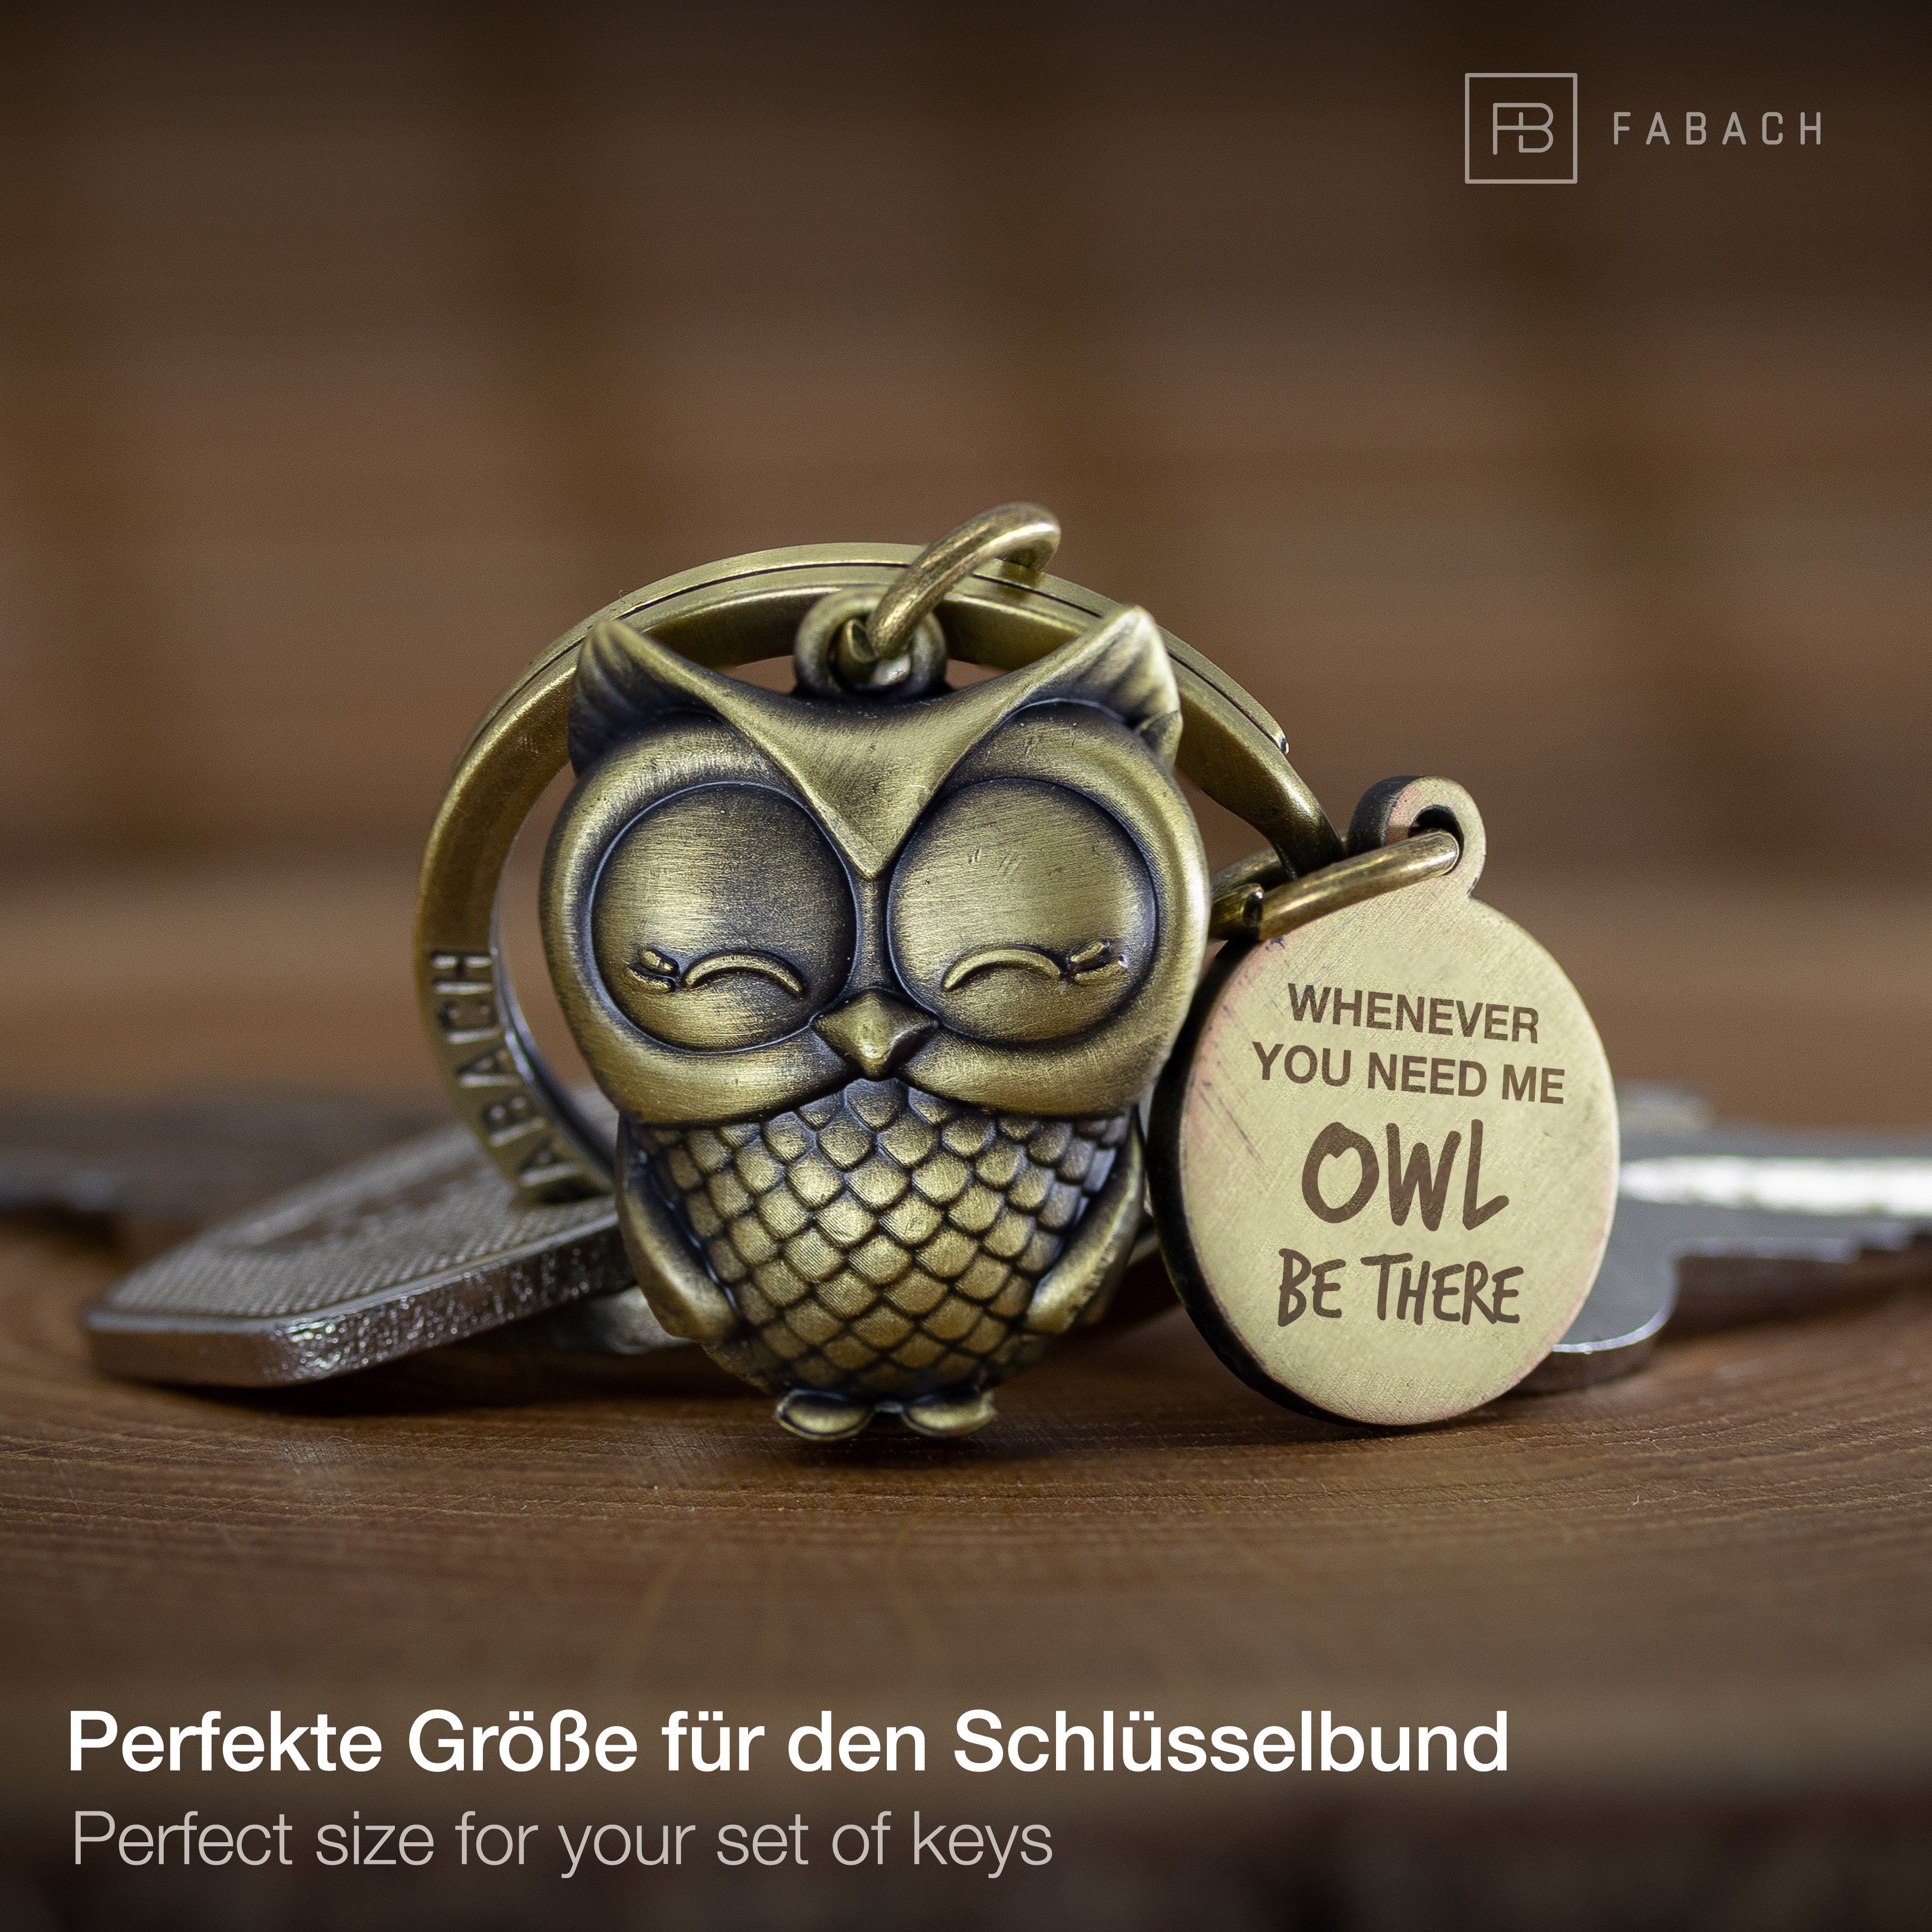 owl Owly be Eule you there Whenever Bronze Schlüsselanhänger Gravur FABACH - me need Glücksbringer Antique